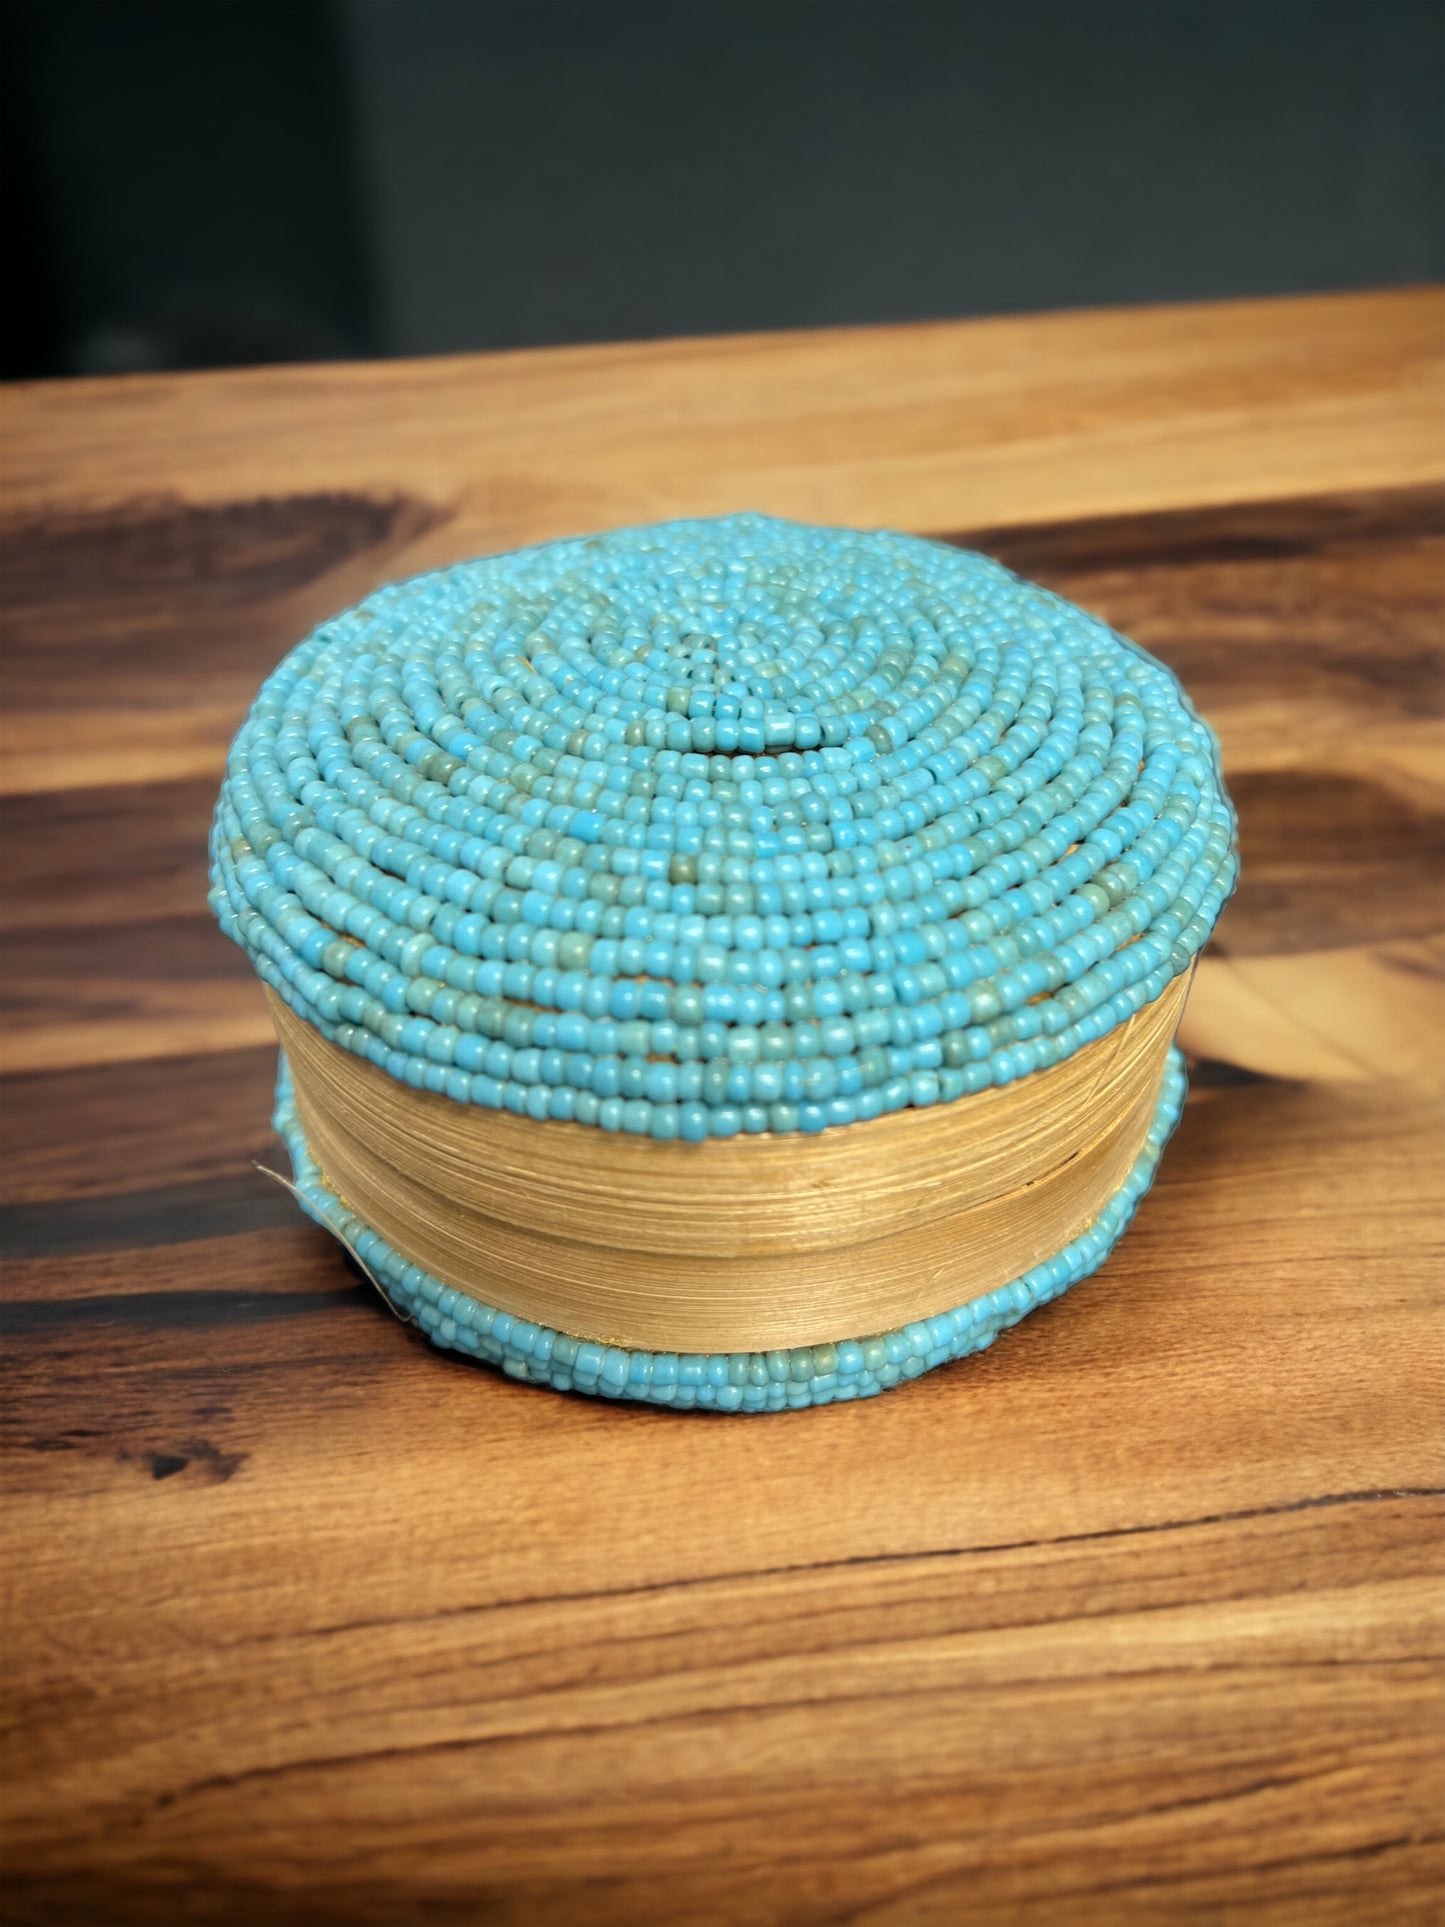 Elevate your jewelry storage with our Beaded Jewelry Box Round. With its handcrafted beauty and practical design, it's the perfect accessory for organizing and displaying your most treasured pieces.